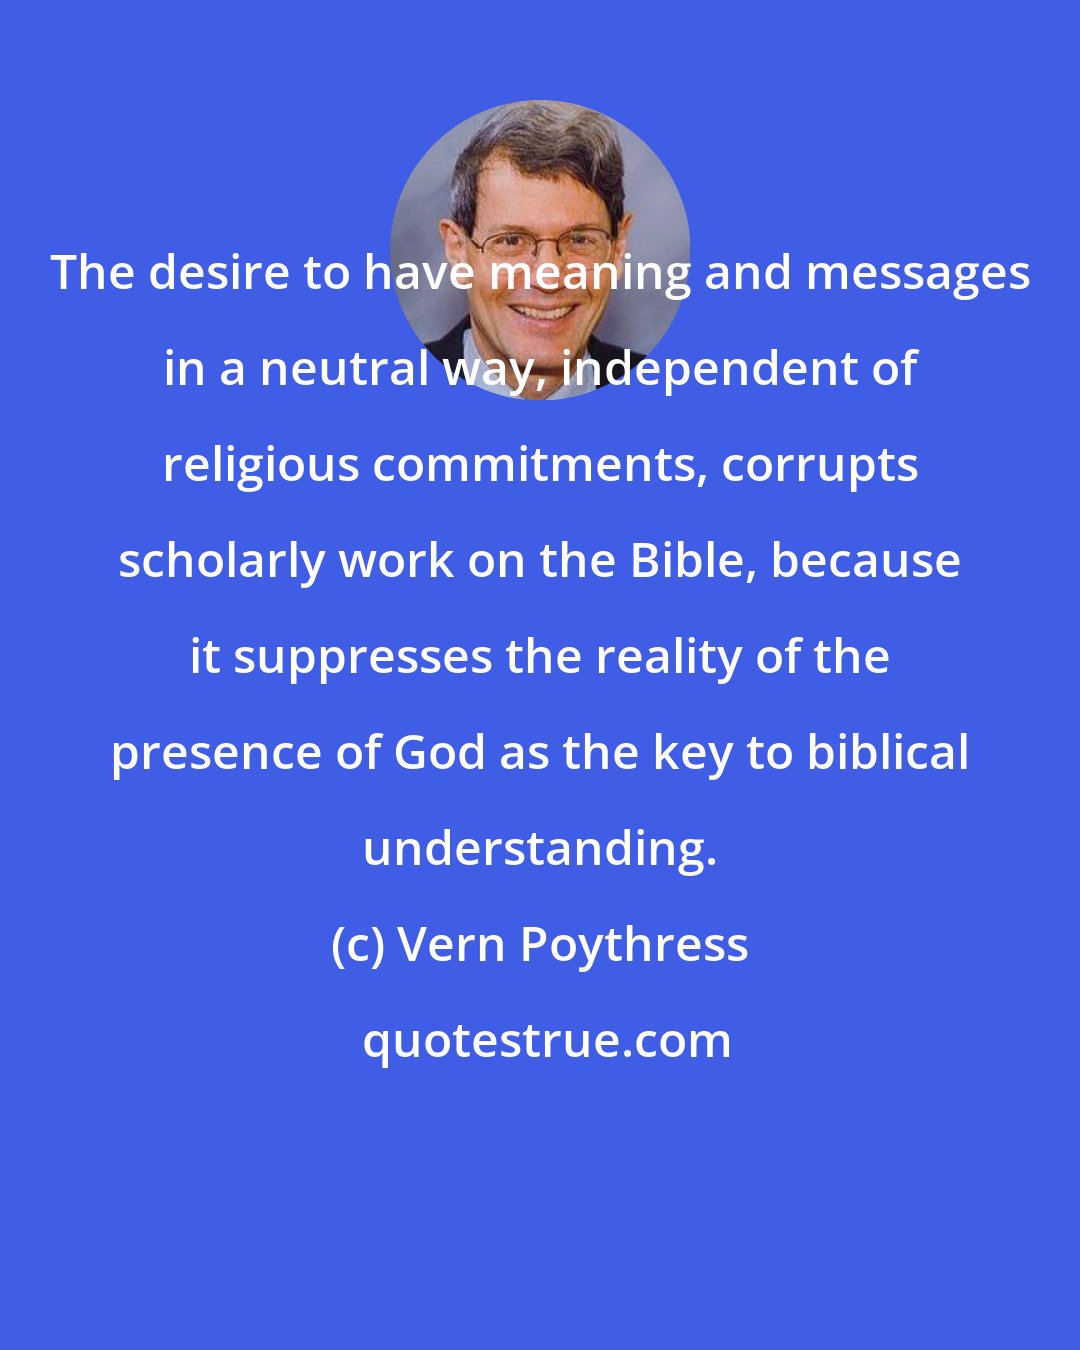 Vern Poythress: The desire to have meaning and messages in a neutral way, independent of religious commitments, corrupts scholarly work on the Bible, because it suppresses the reality of the presence of God as the key to biblical understanding.